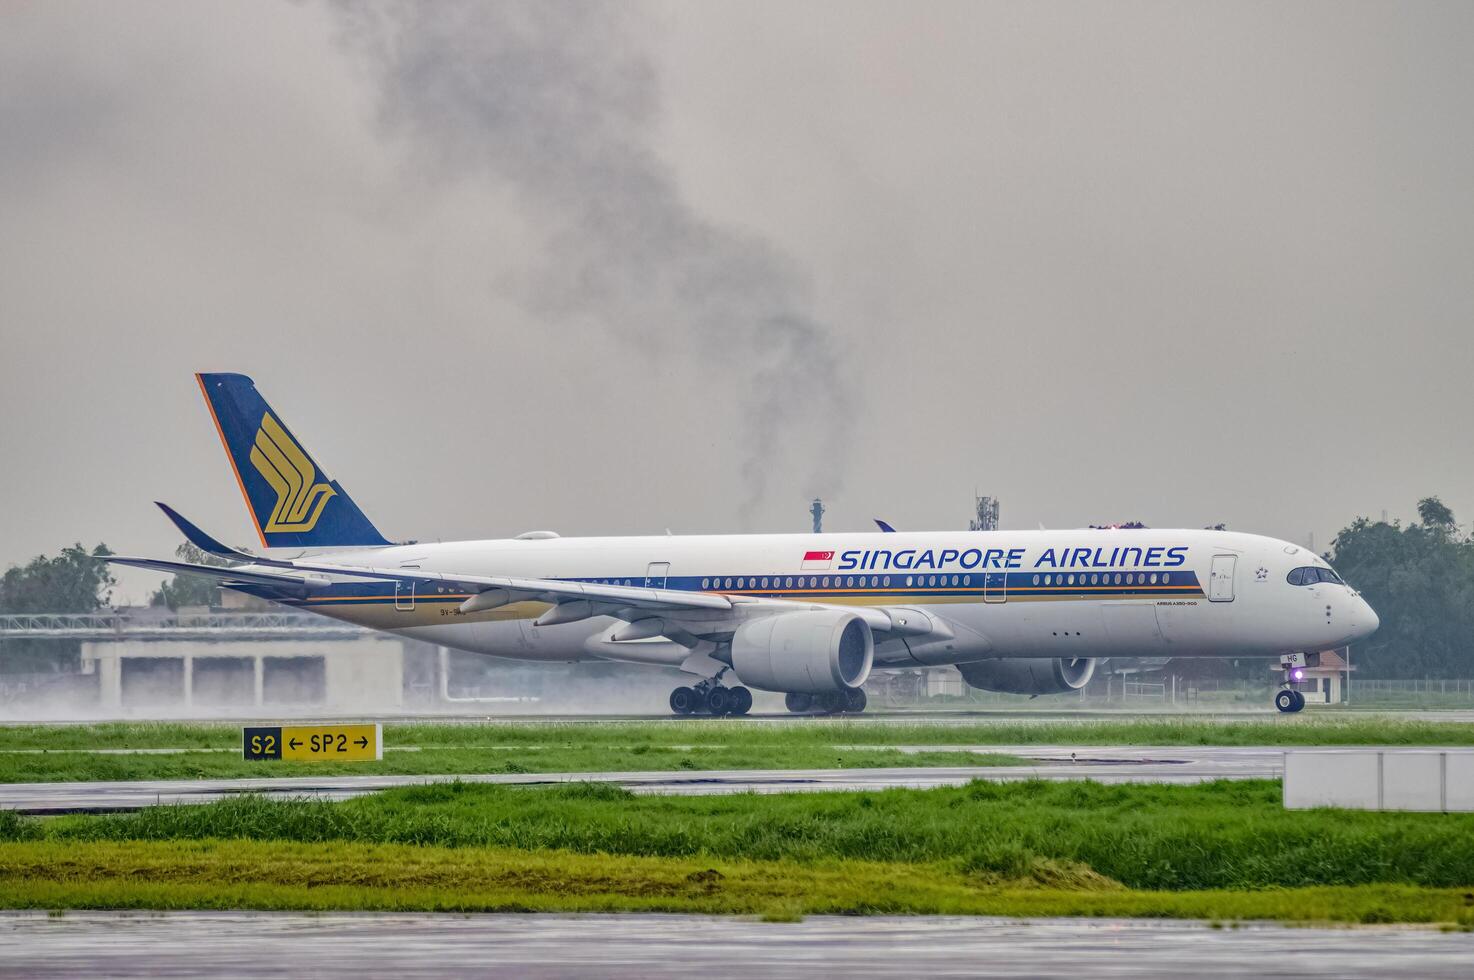 An Airbus A350-941 aircraft belonging to Singapore Airline takes off on the runway at Juanda International Airport Surabaya in Sidoarjo during the rain, Indonesia, 6 January 2024 photo